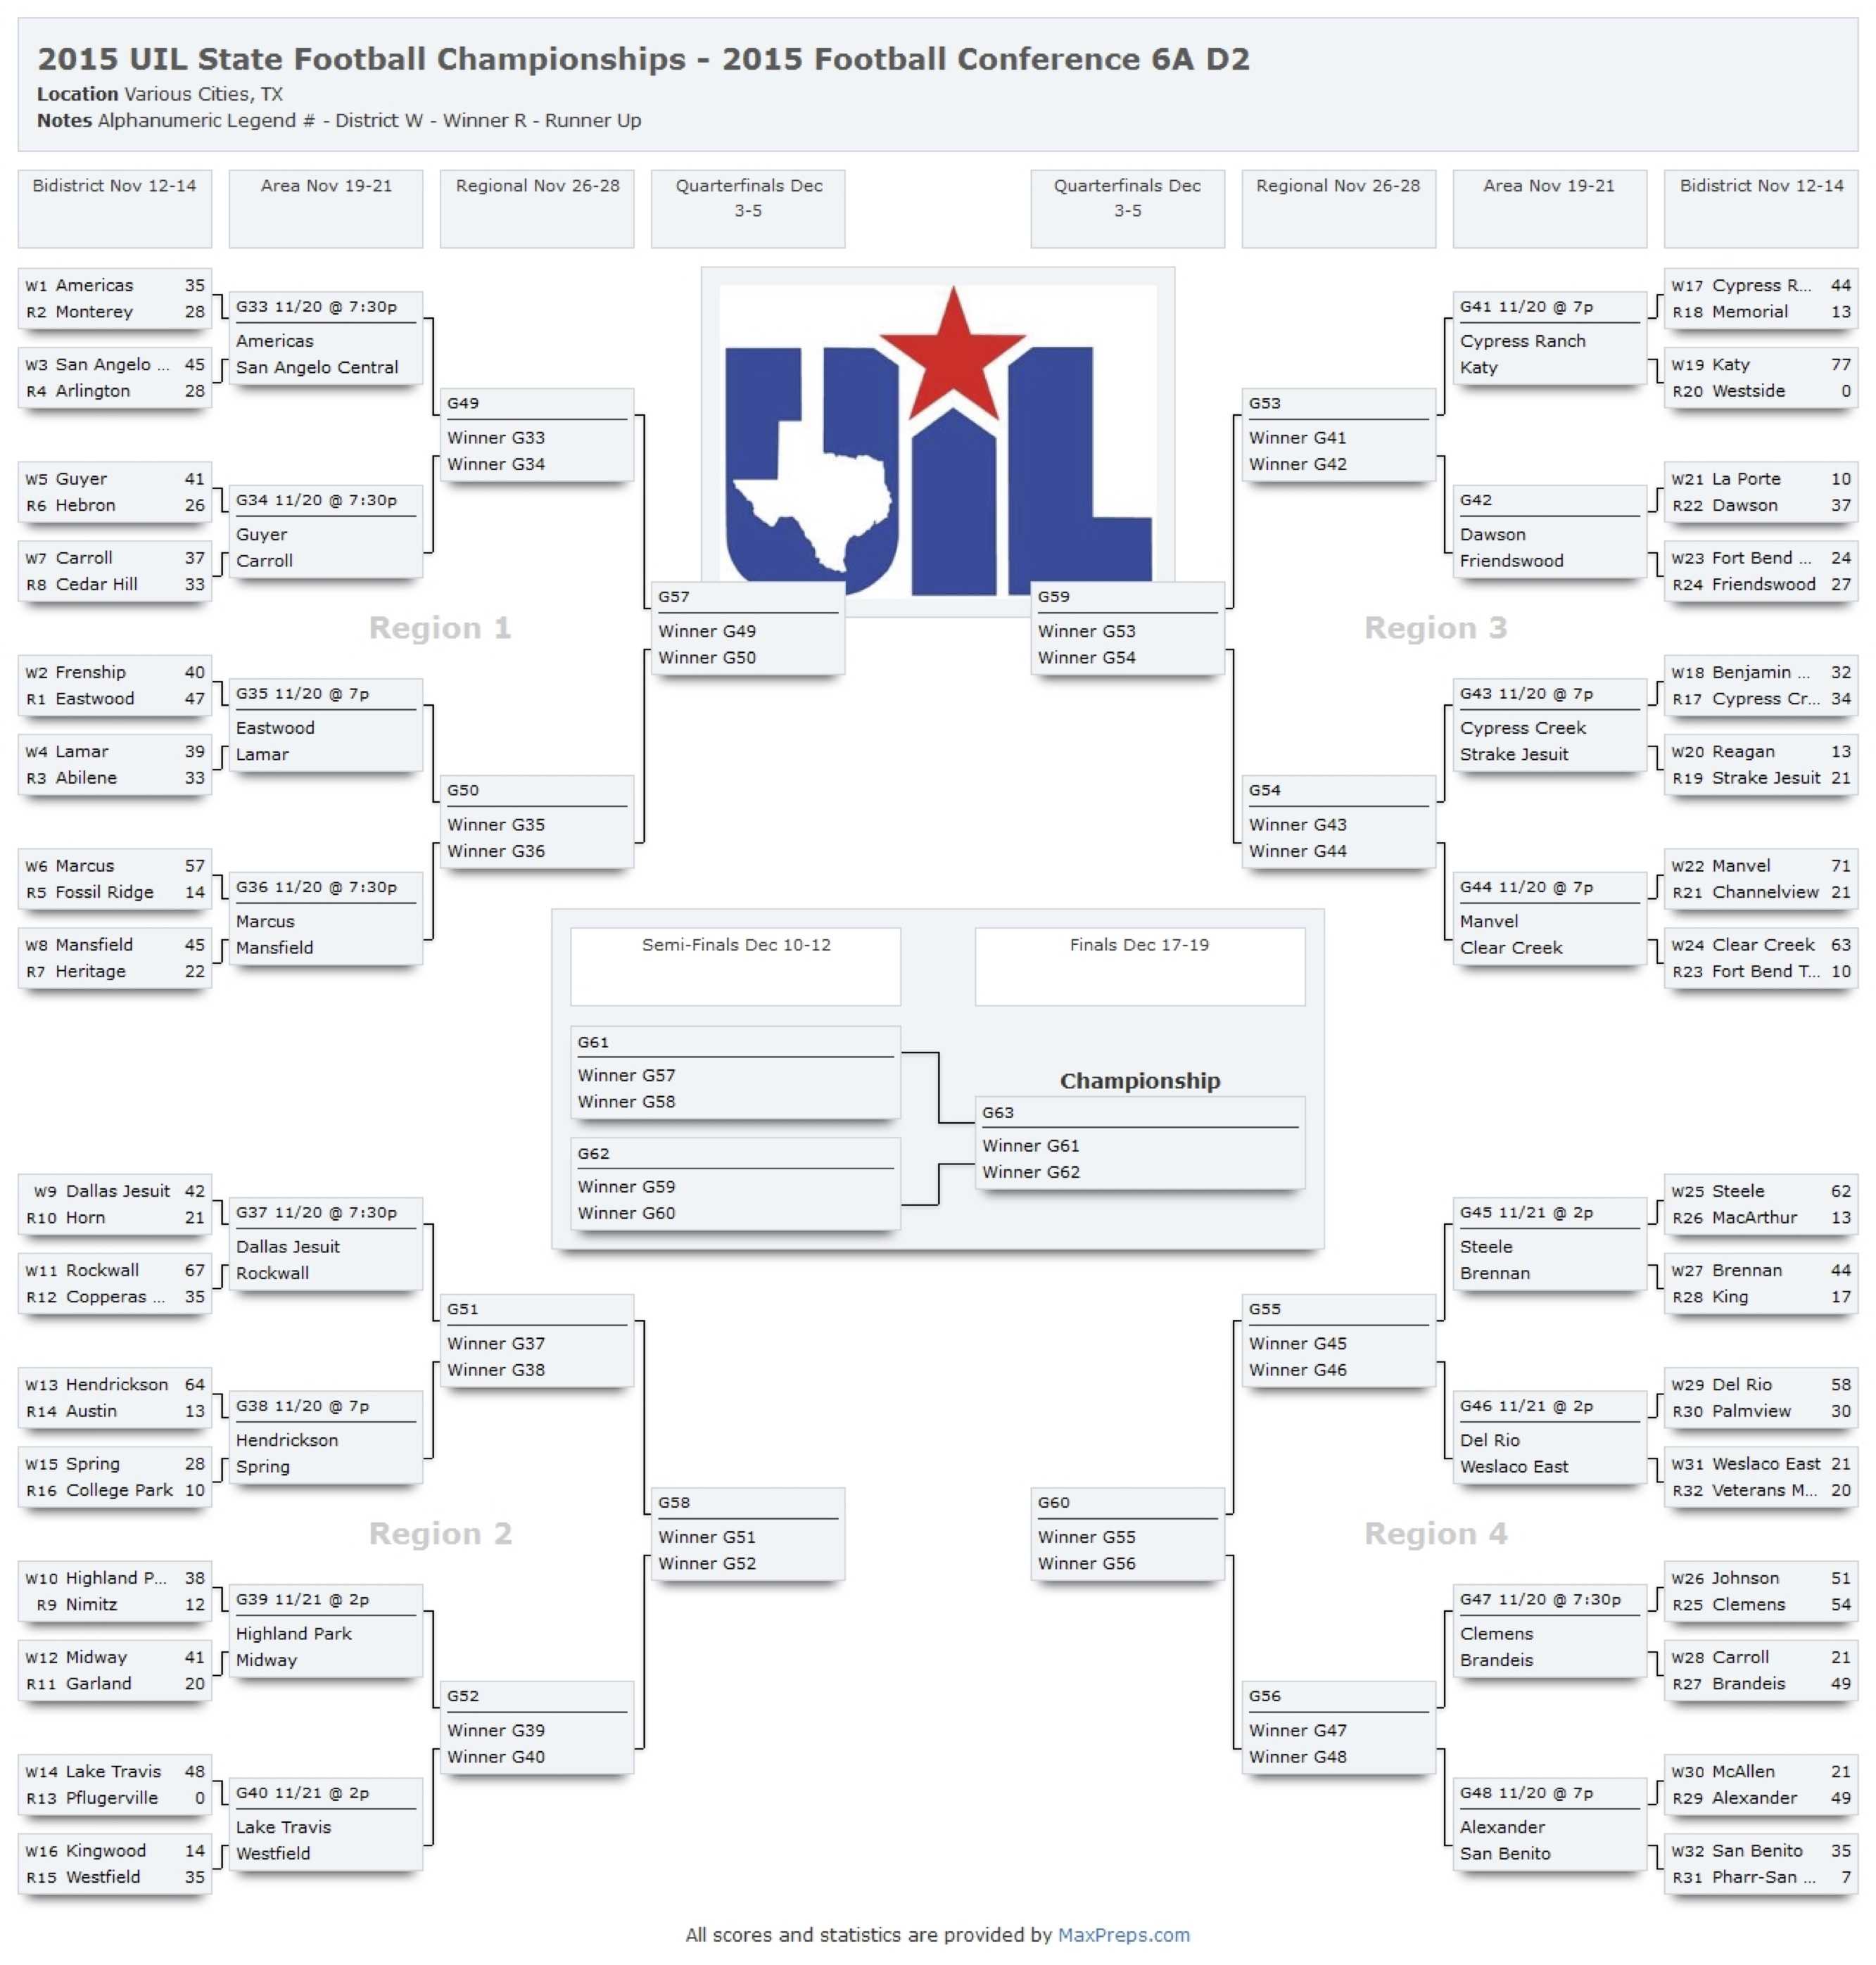 2015 UIL State Football Championships - 2015 Football Conference 6A D2